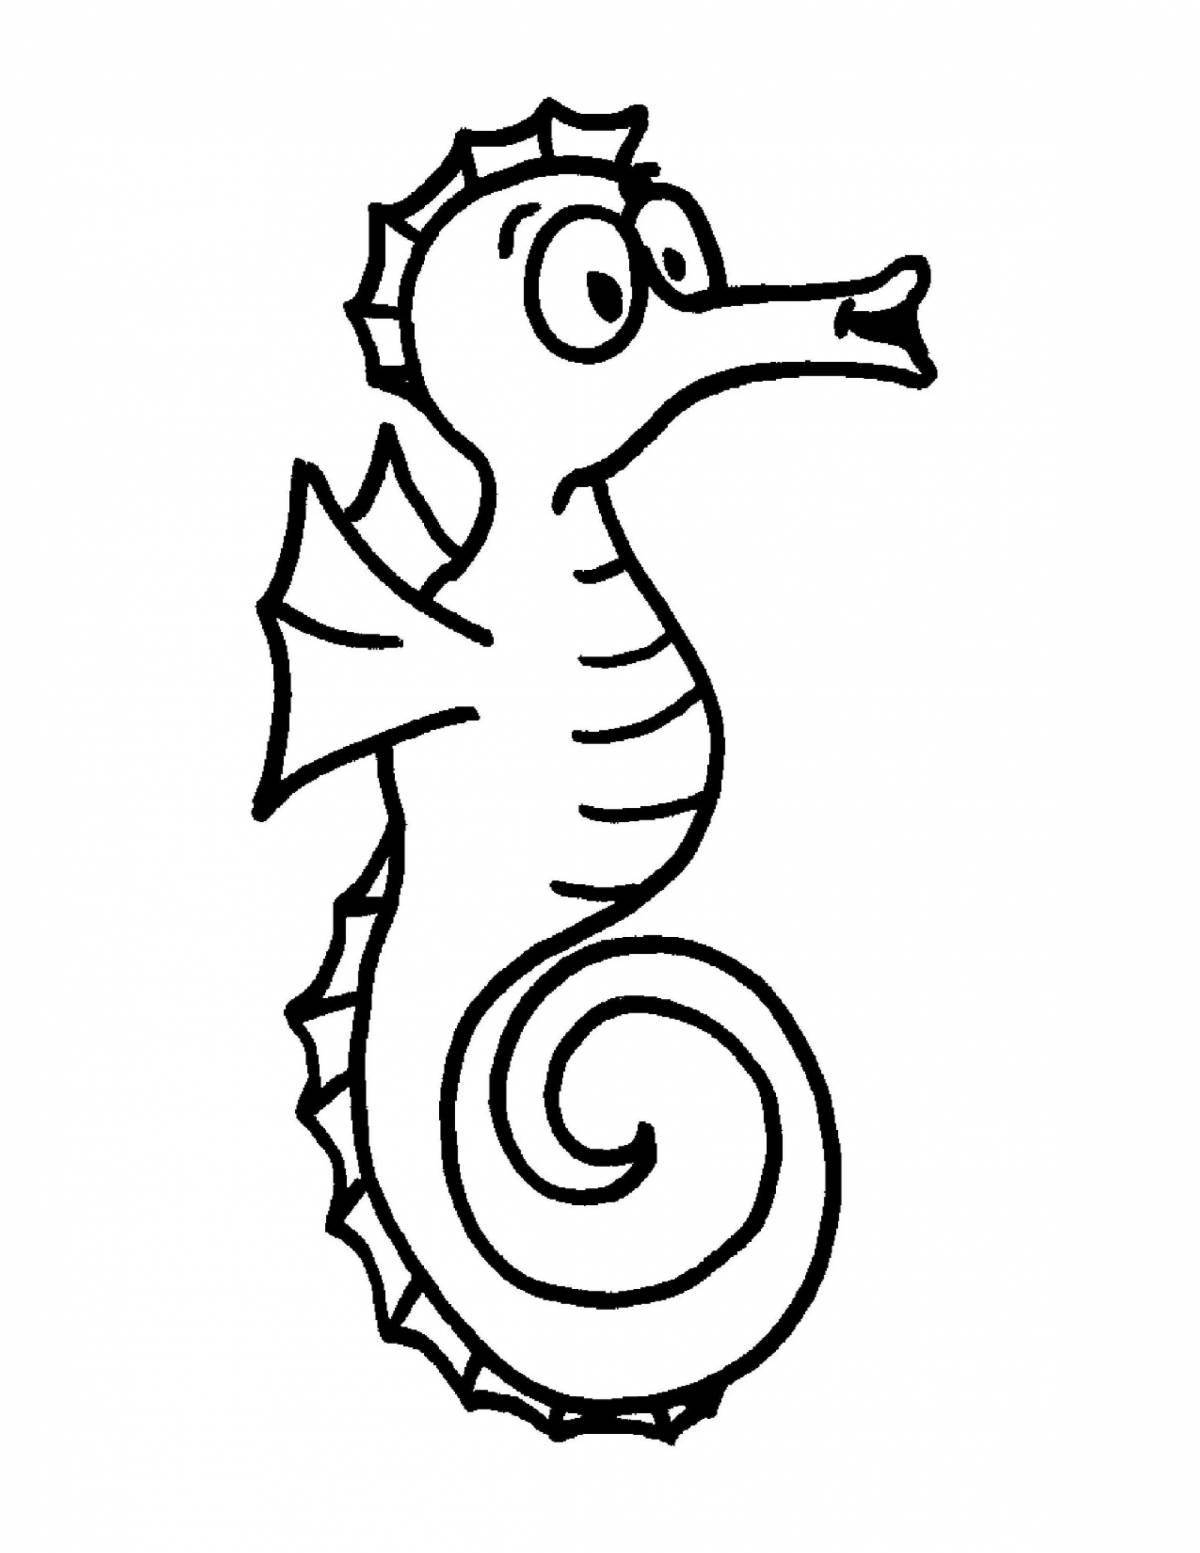 Violent seahorse coloring book for kids